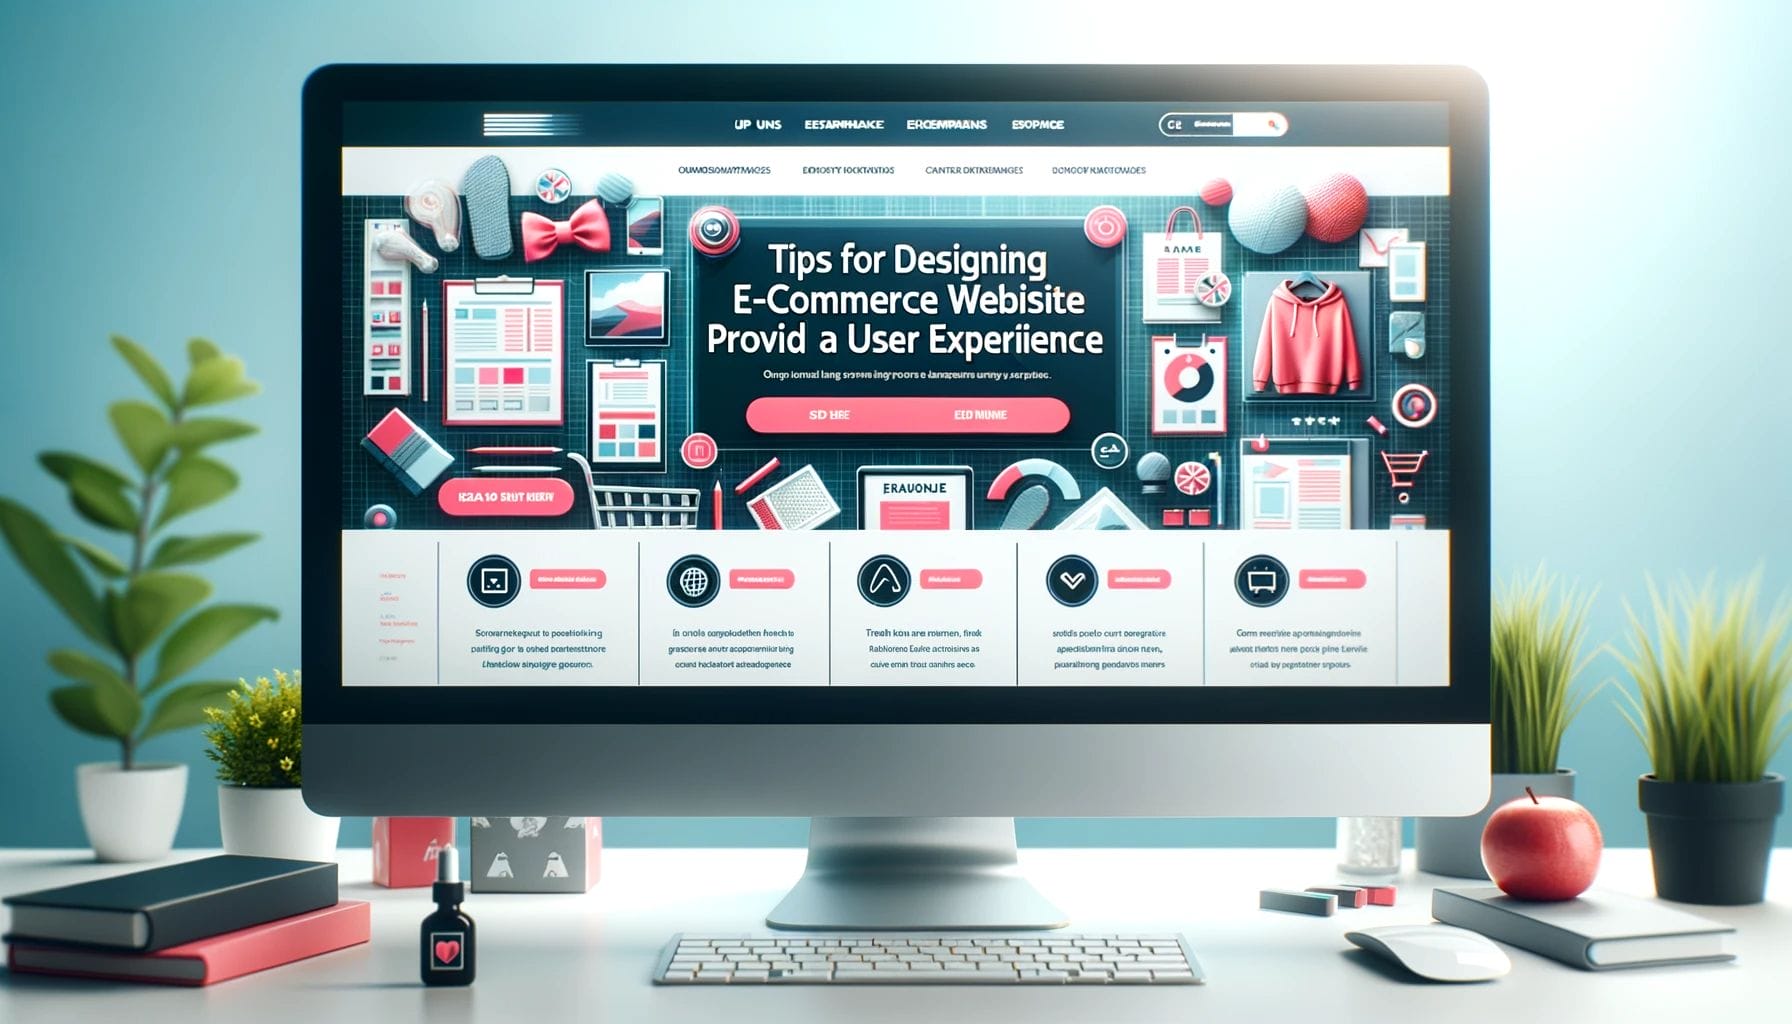 Designing an E-Commerce Website that Provides a Great User Experience